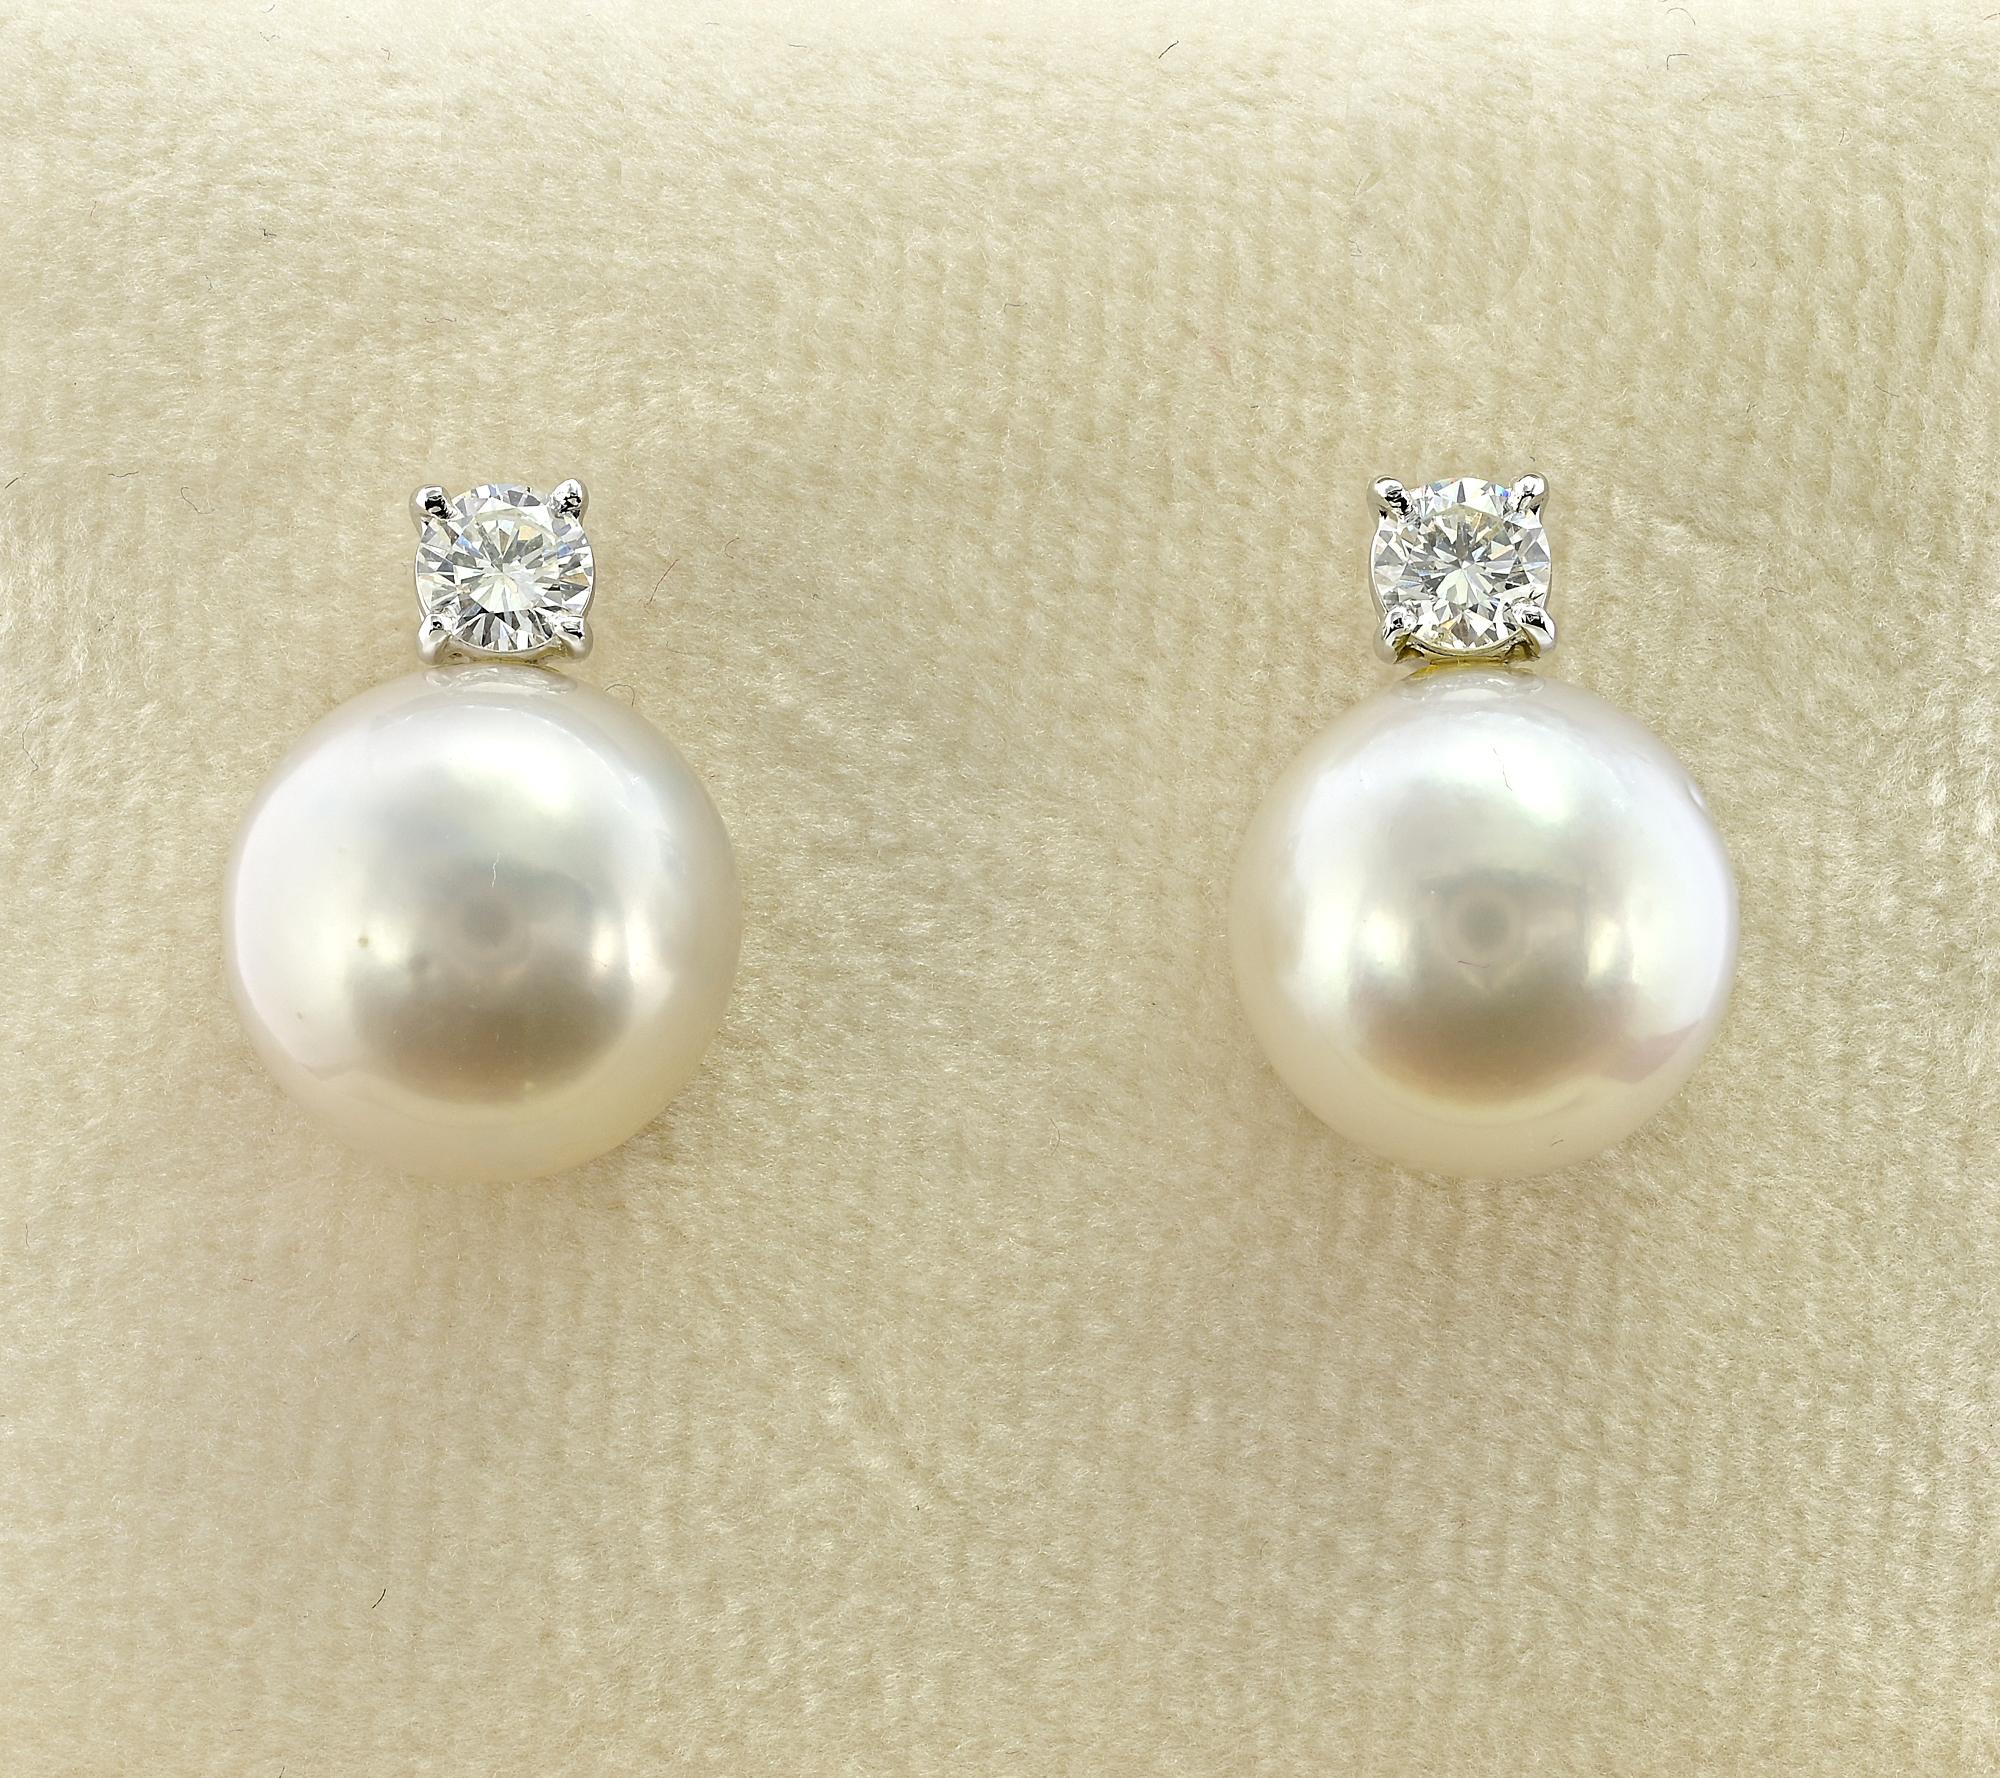 These superb pair of 1980 circa Pearl earrings are the classy statement to wear all the time
The two South Sea Pearls of beautiful iridescence and silky sheen measuring 11/11.5mm. white cream good roundness few natural pits typical of the South Sea